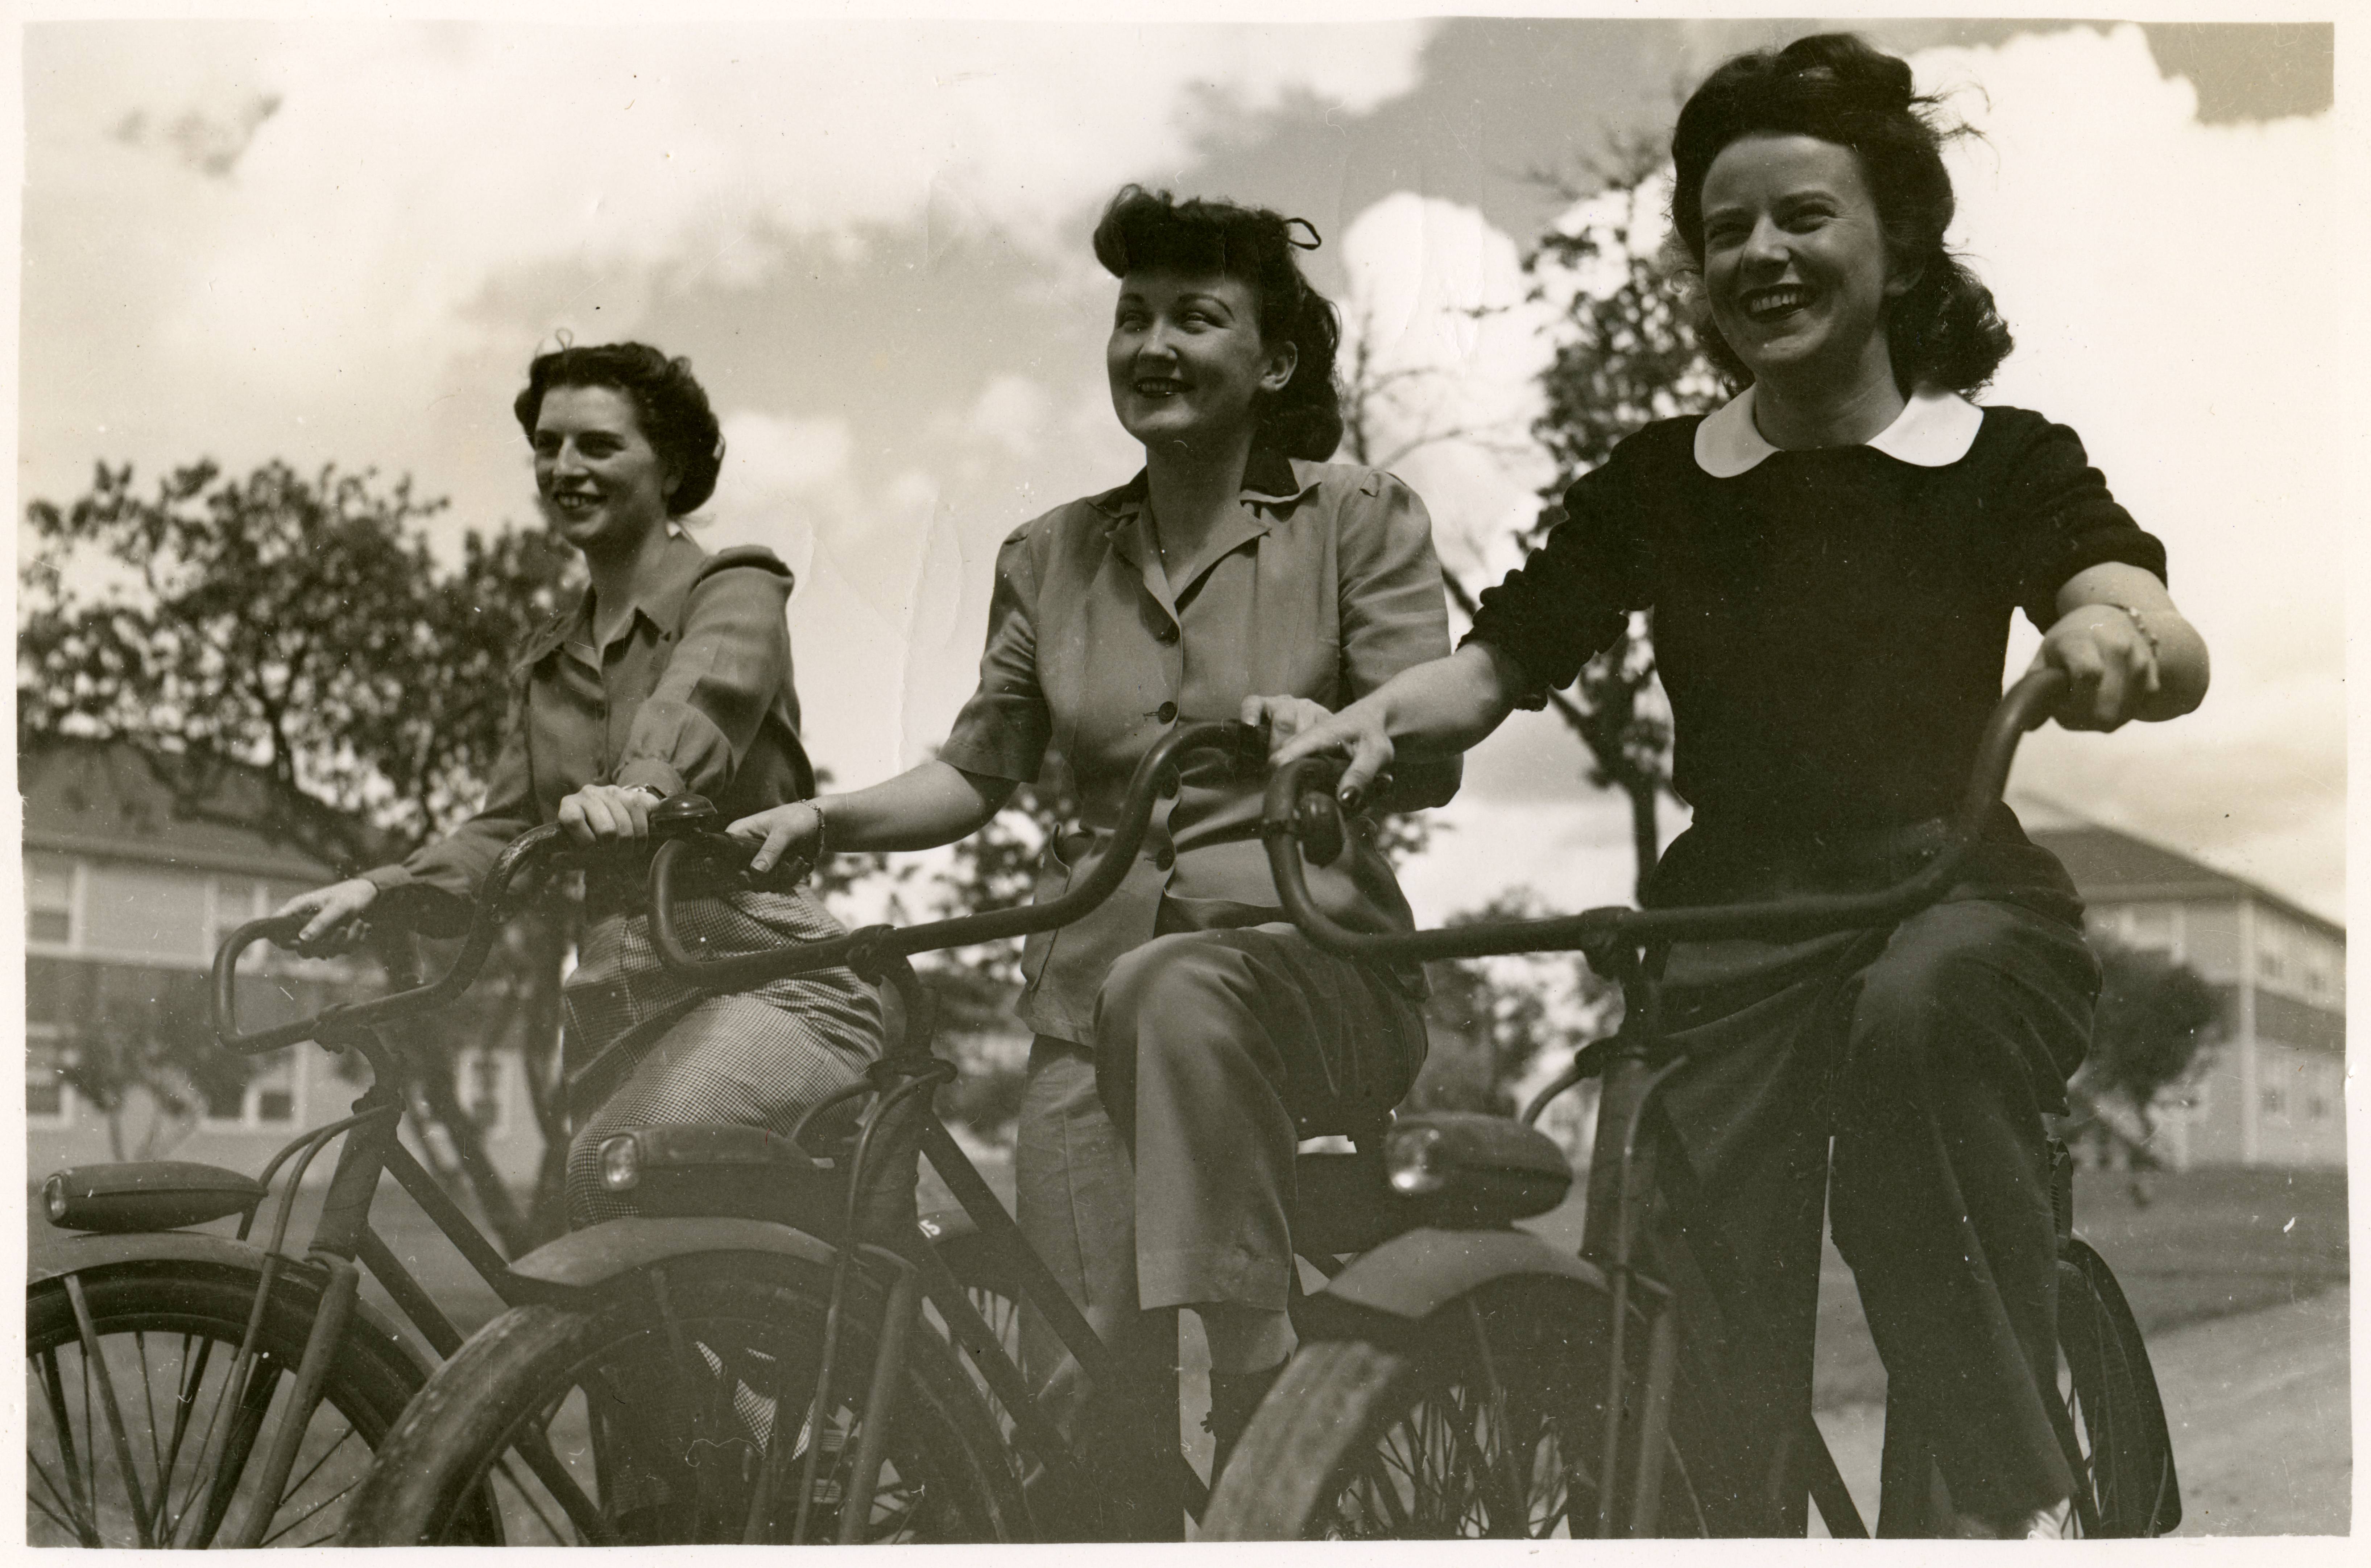 Black and white photograph of three women in work clothes riding bicycles.